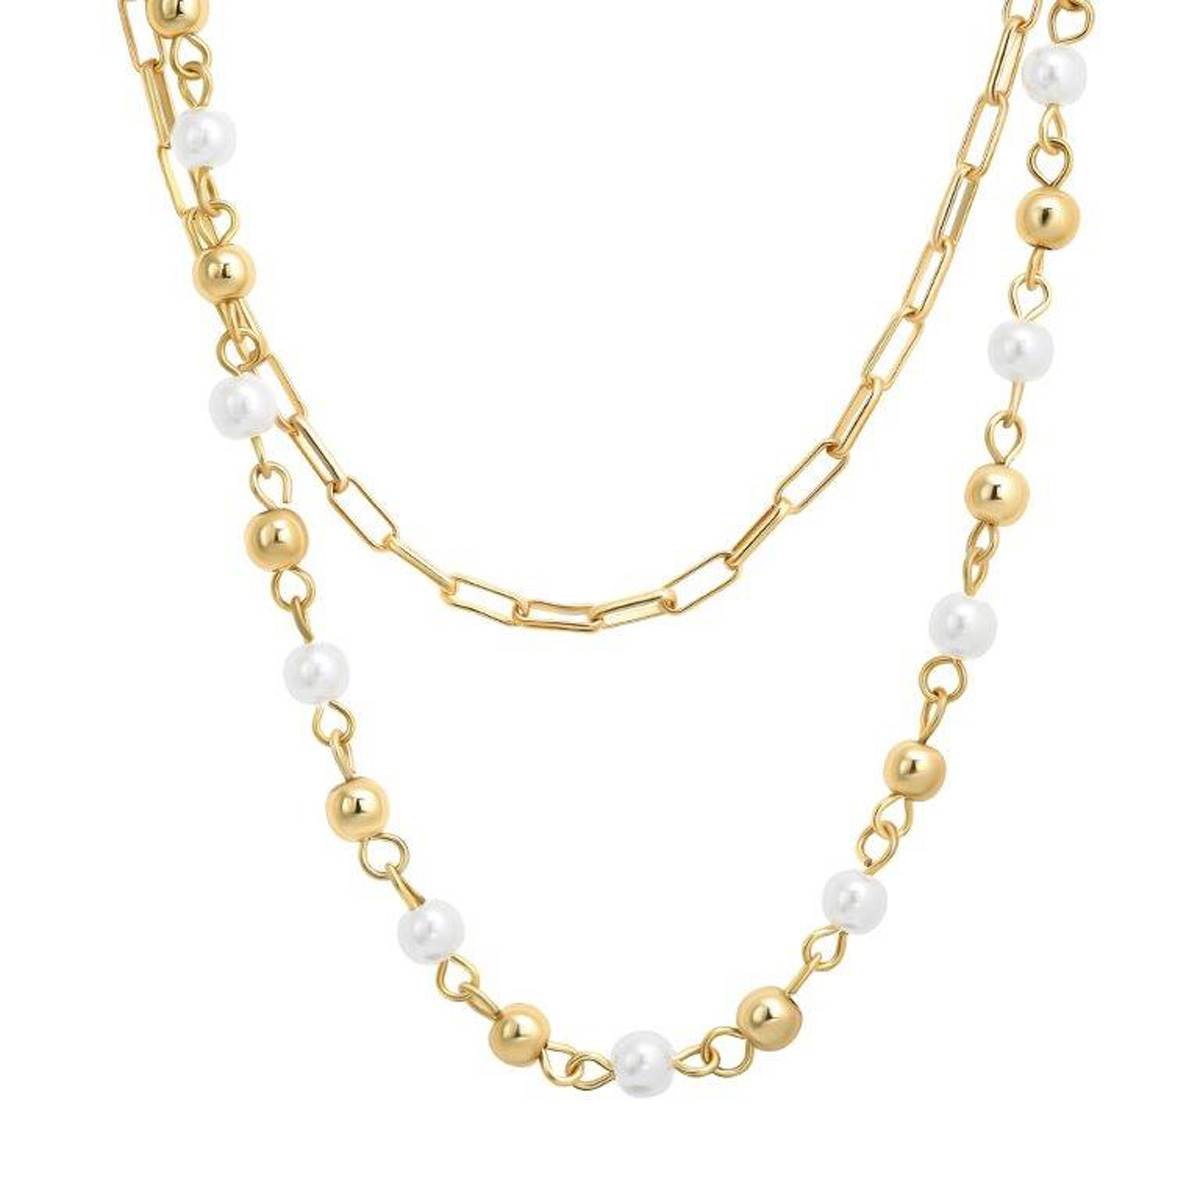 Roman Gold-Tone Link & Pearl Bead Double Layered Necklace